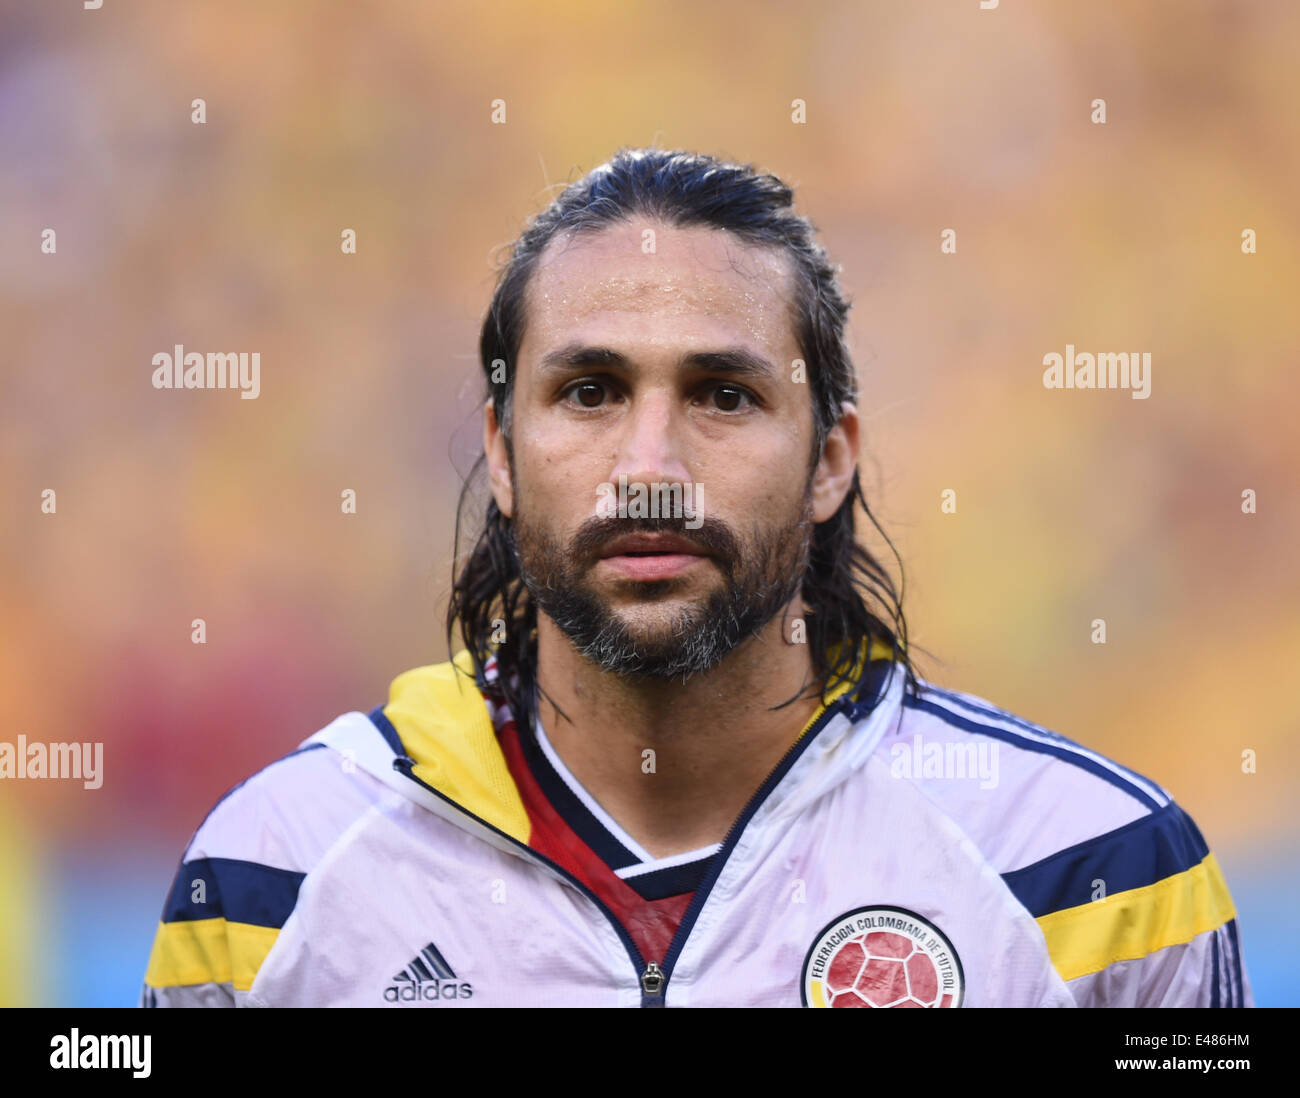 Fortaleza, Brazil. 04th July, 2014. Mario Yepes of Colombia seen during the FIFA World Cup 2014 quarter final match soccer between Brazil and Colombia at the Estadio Castelao in Fortaleza, Brazil, 04 July 2014. Photo: Marius Becker/dpa/Alamy Live News Stock Photo